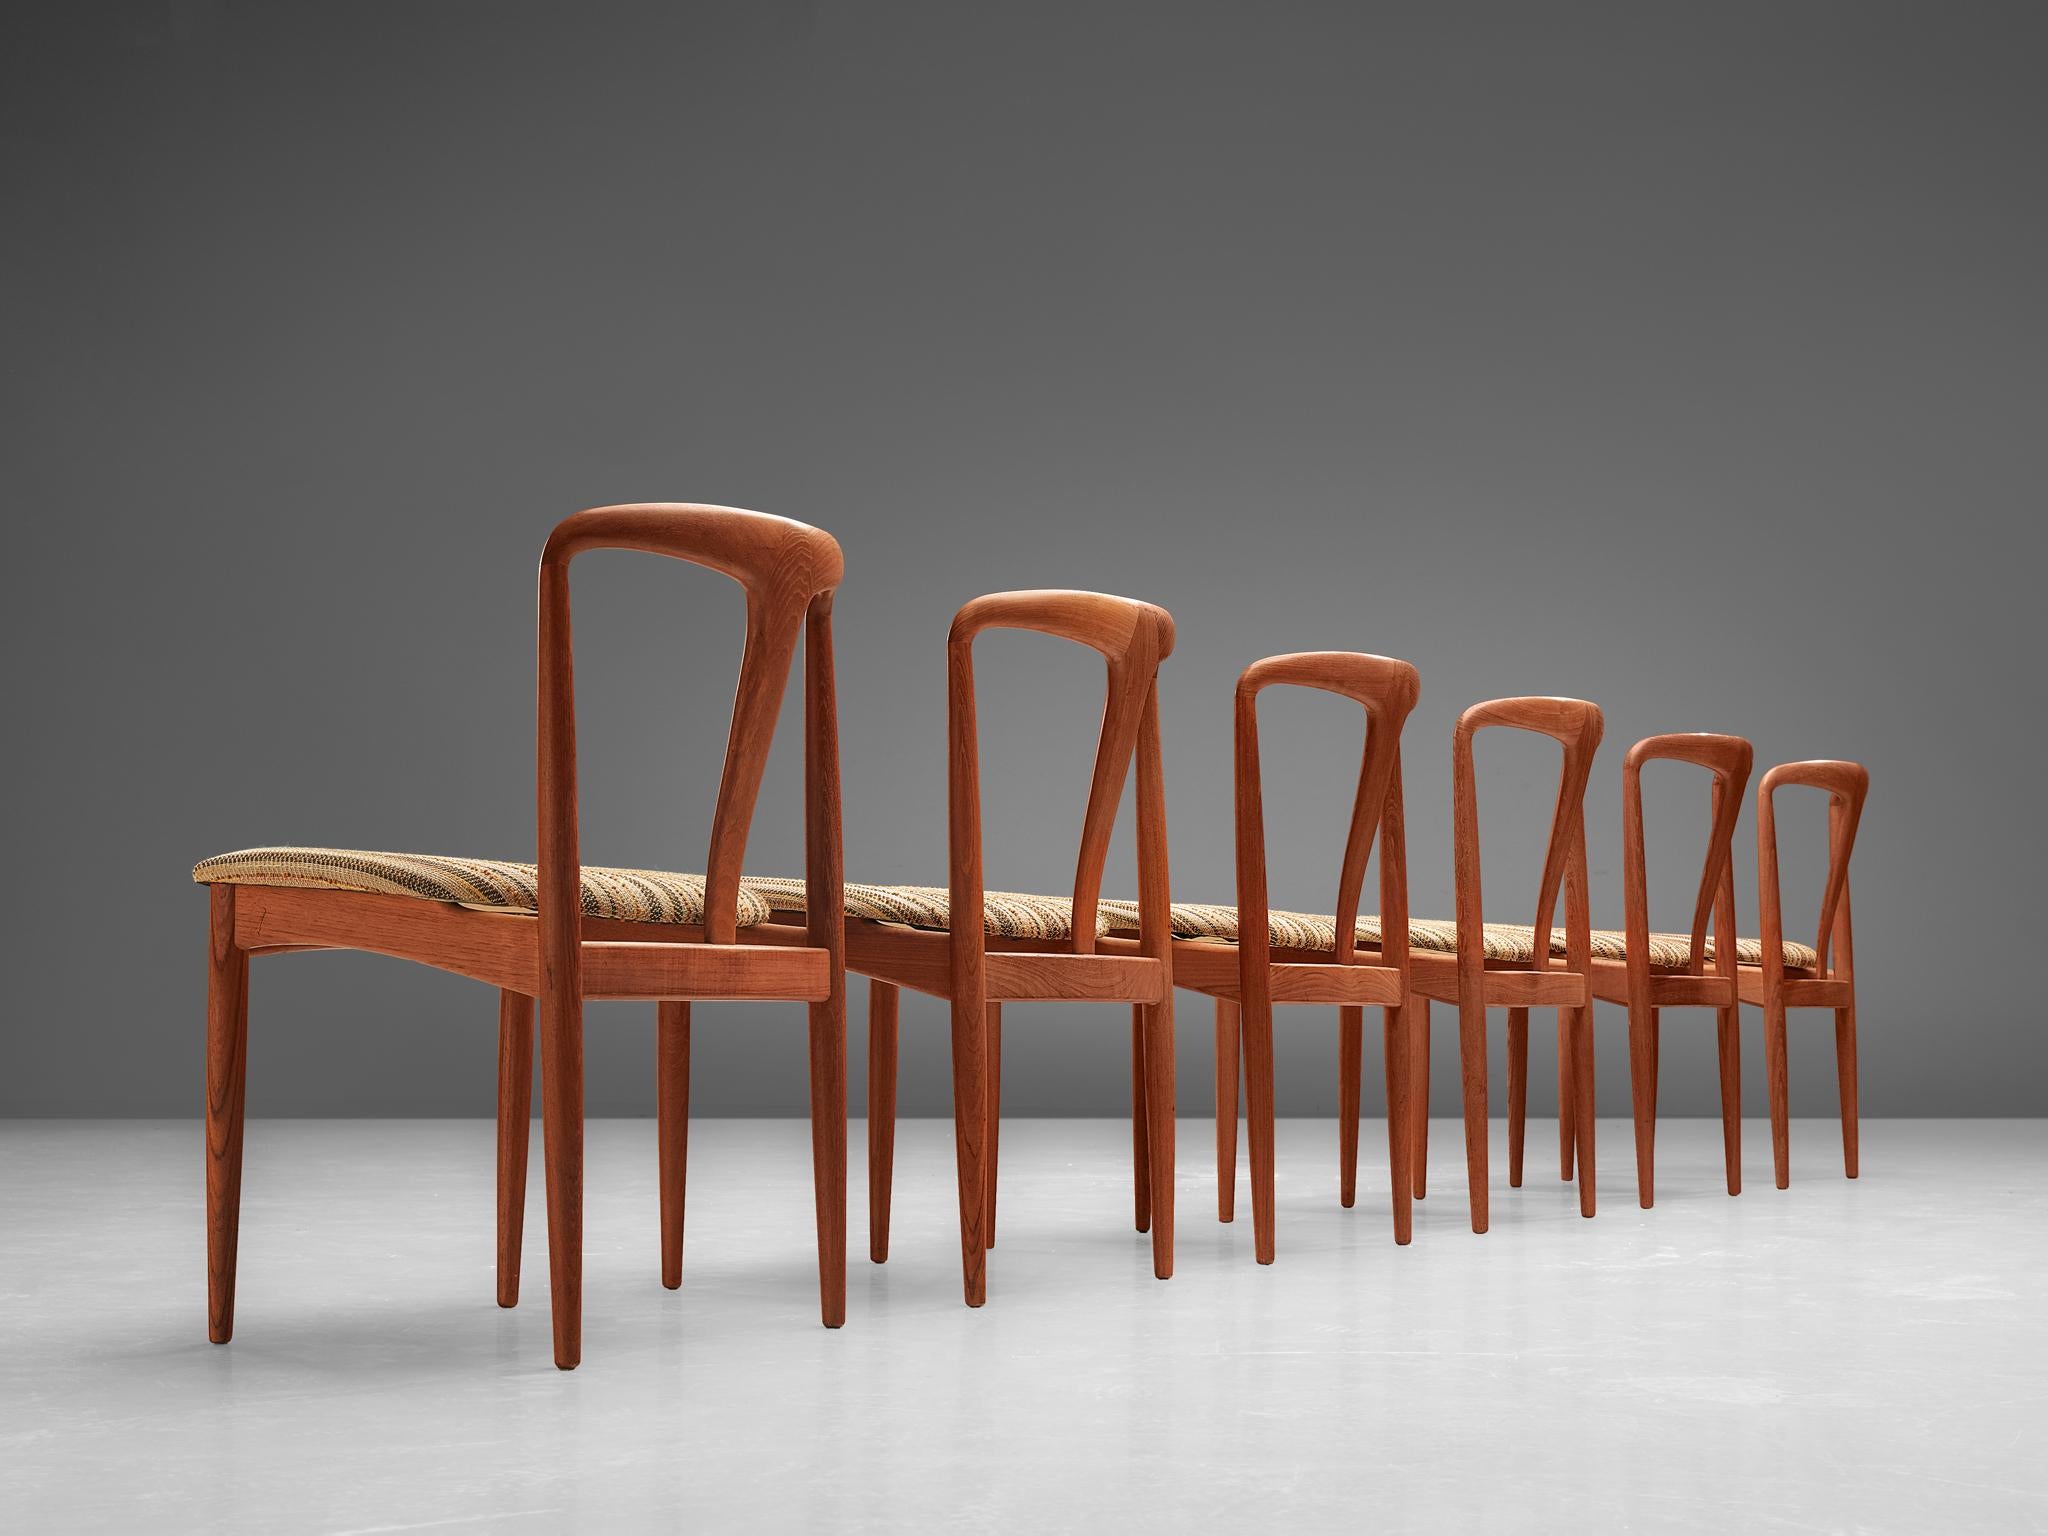 Johannes Andersen for Uldum Møbelfabrik, 'Juliane' set of six dining chairs, teak and textured and striped fabric upholstery, Denmark, 1960s

This set of six dining chairs is designed by the Danish Johannes Andersen and produced by Uldum